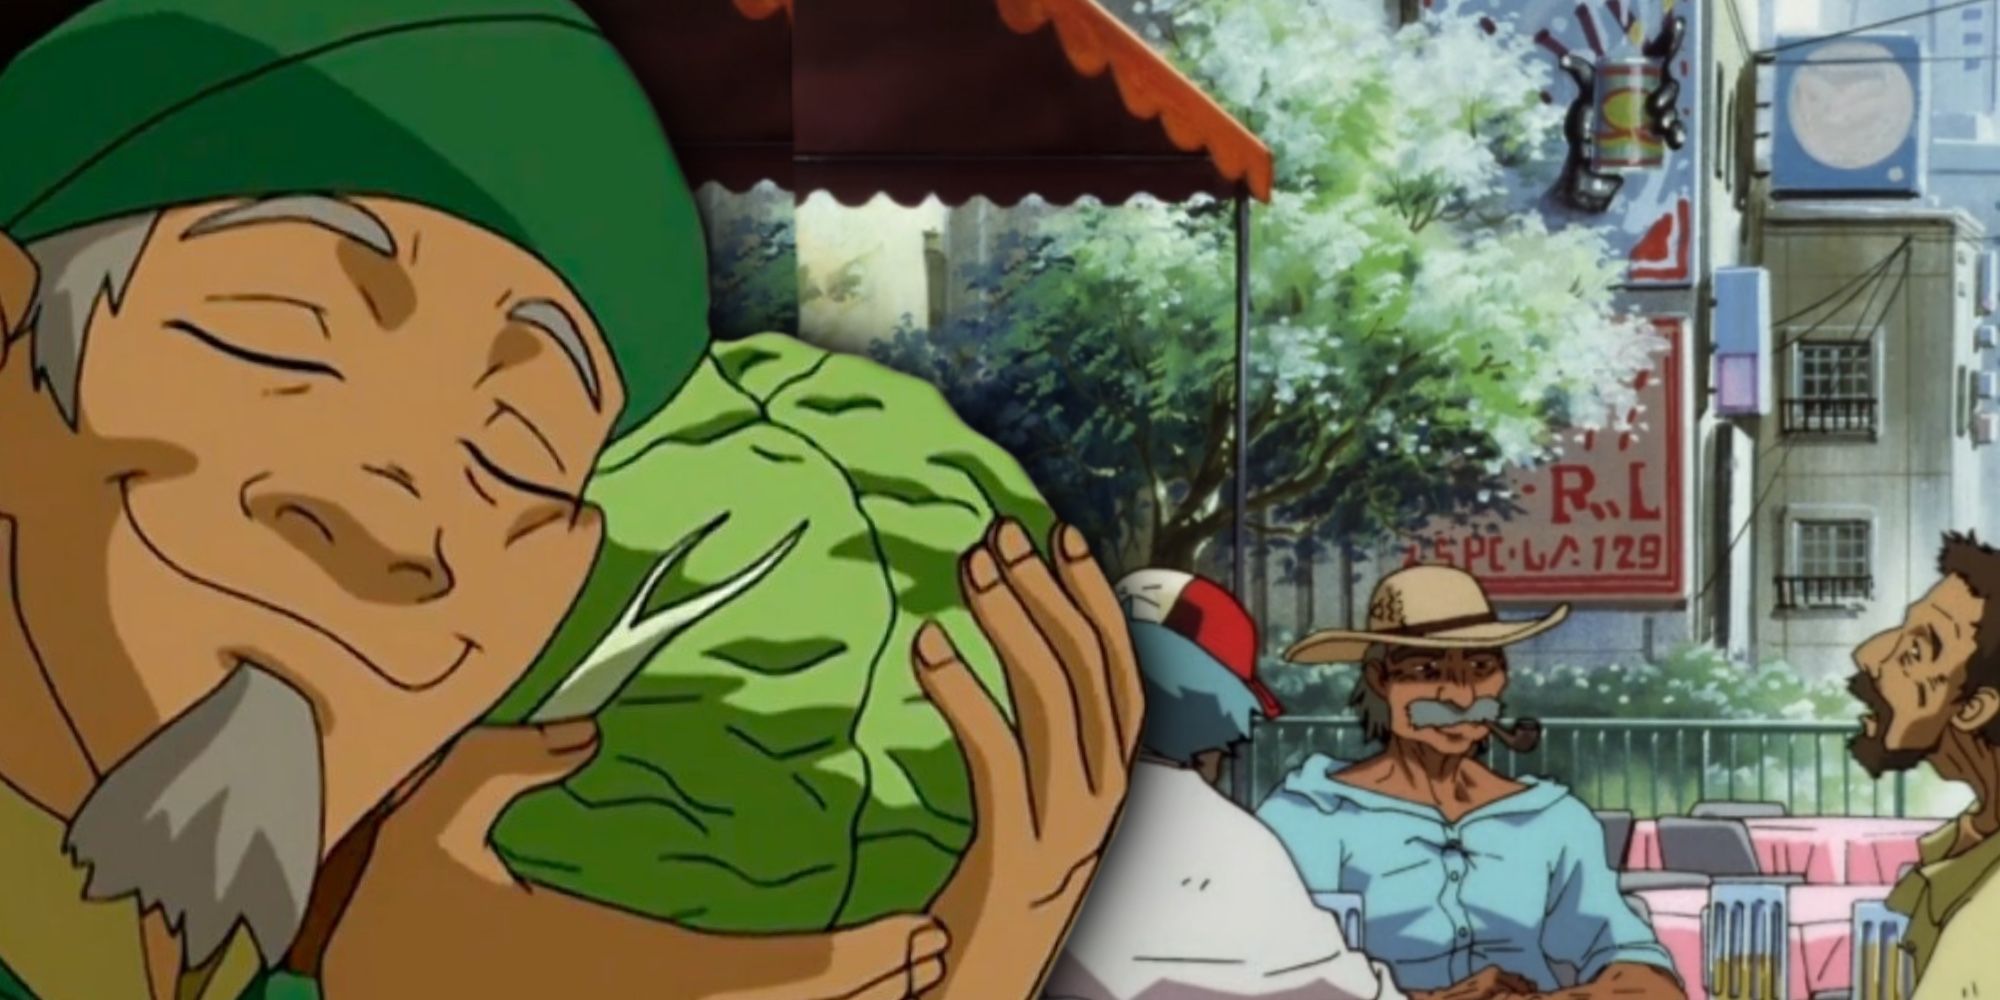 Cabbage Man in Avatar The Last Airbender and Three Old Men in Cowboy Bebop